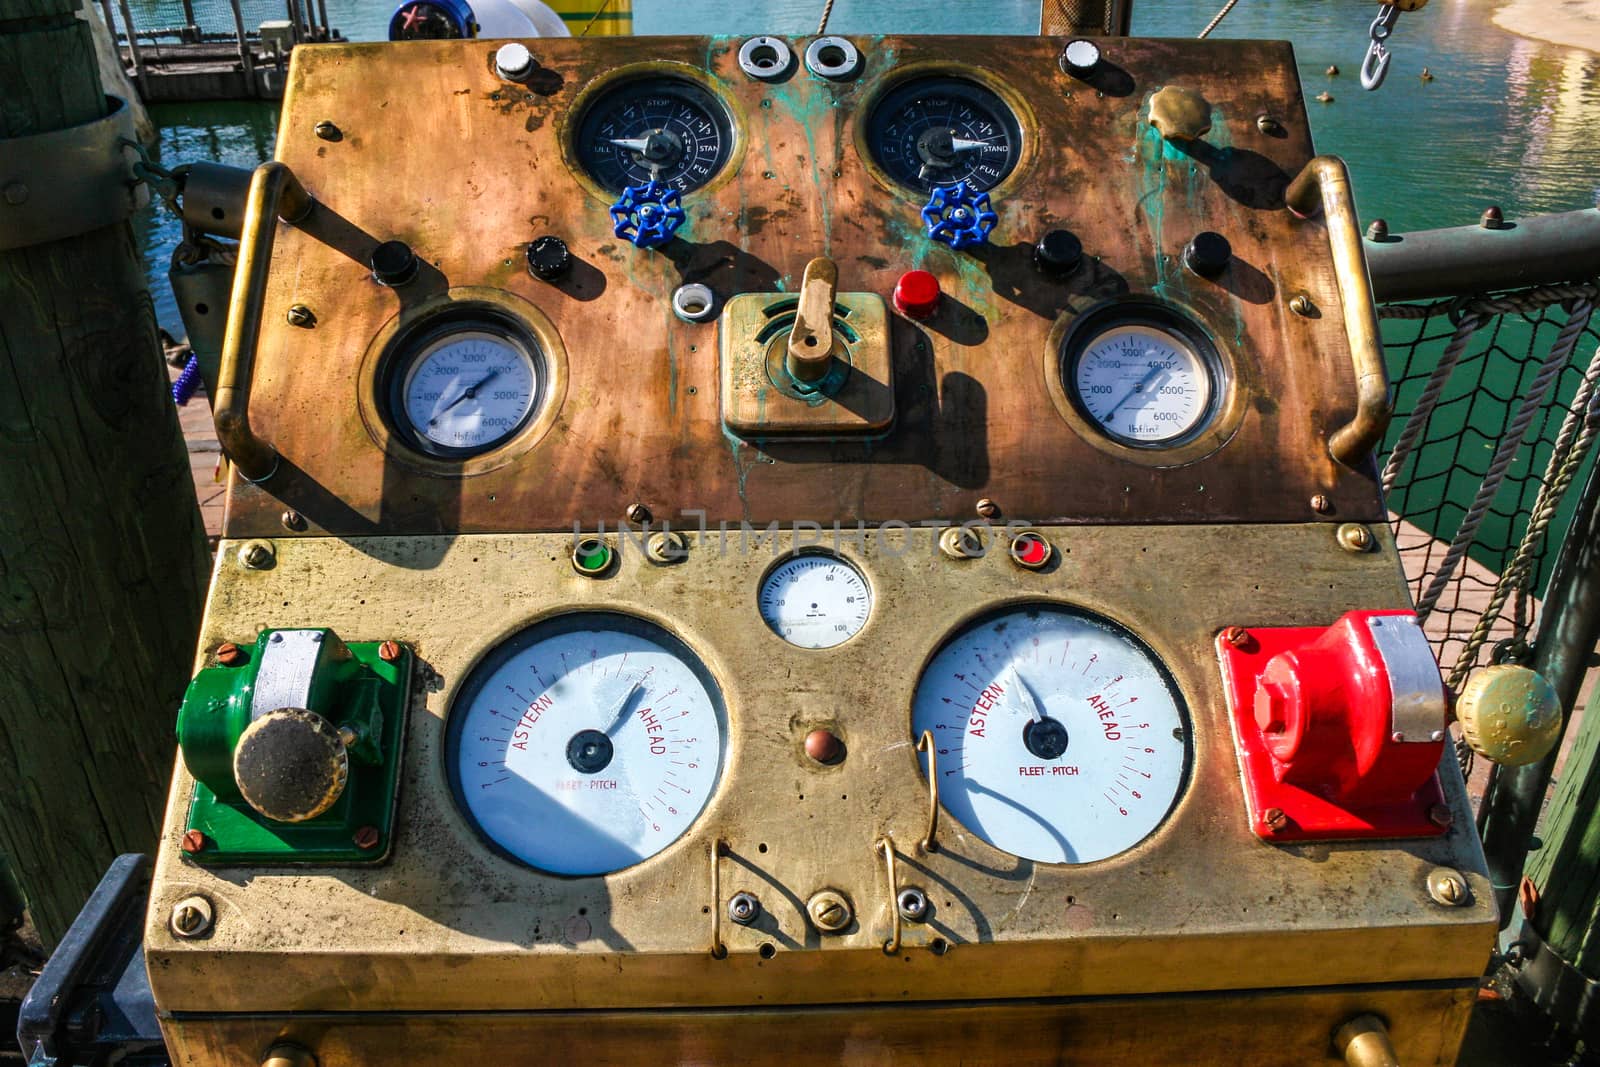 A machine with many dials and knobs